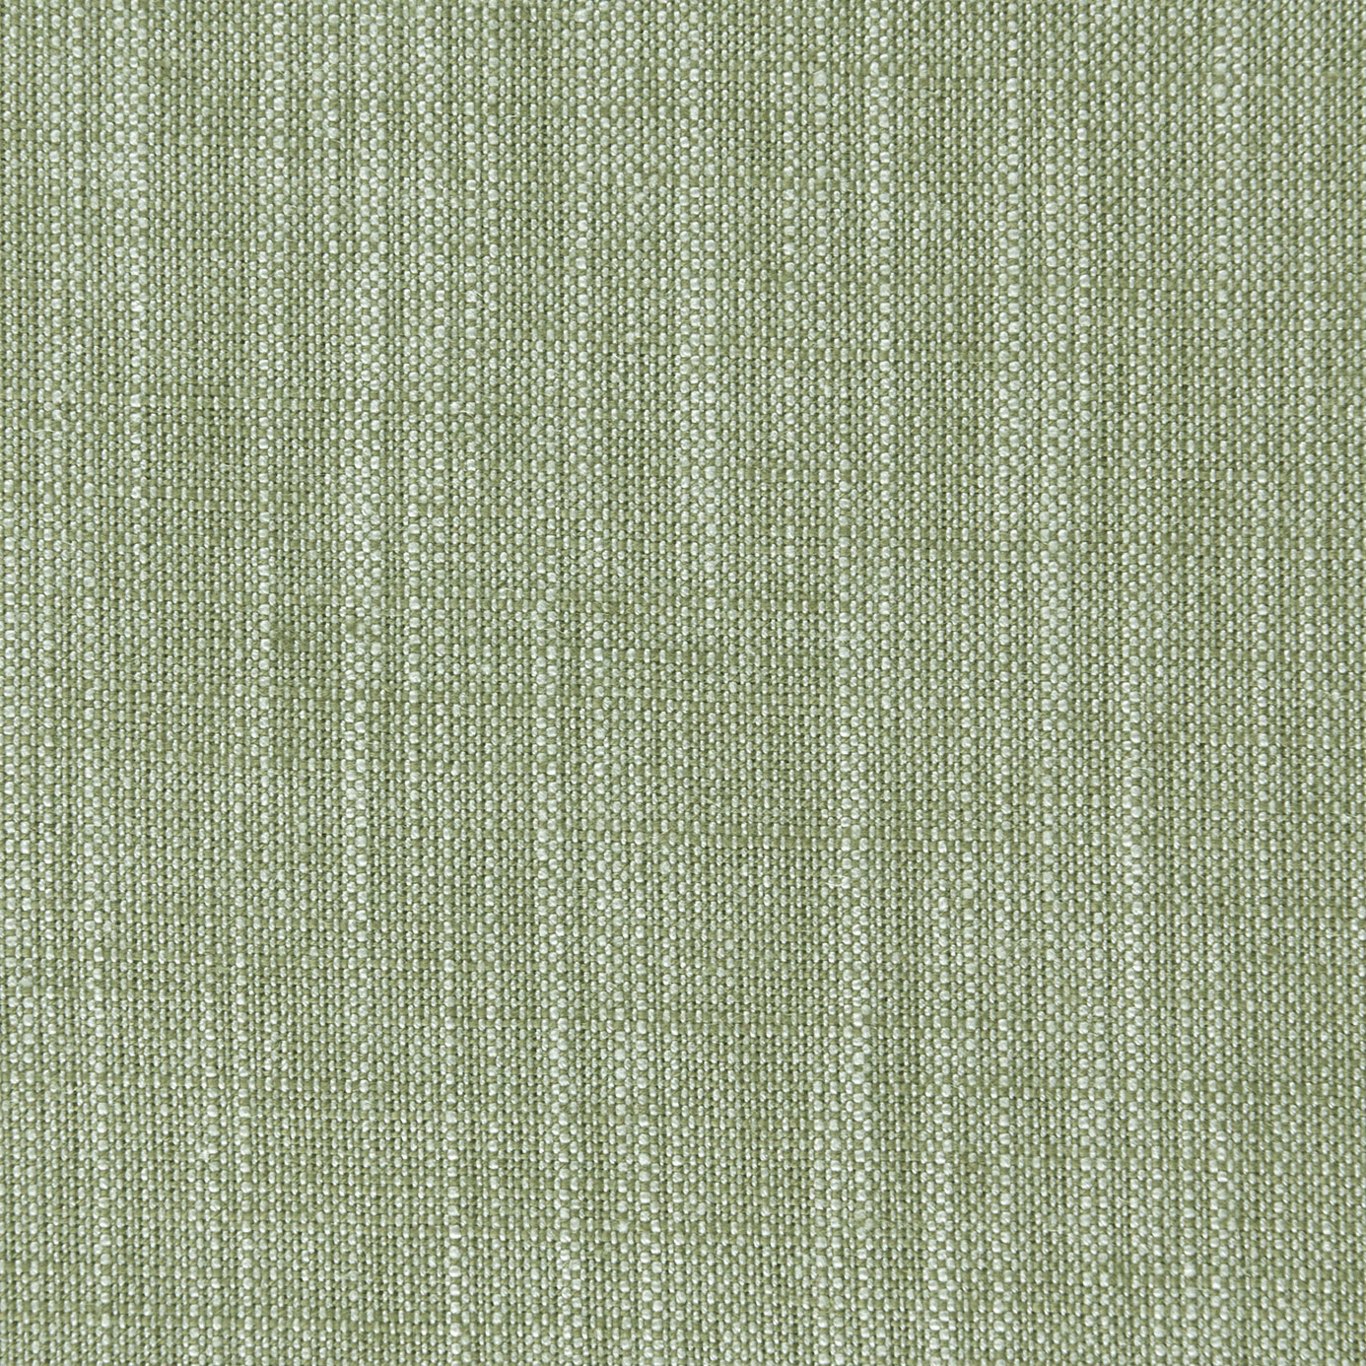 Biarritz Parsley Fabric by CNC